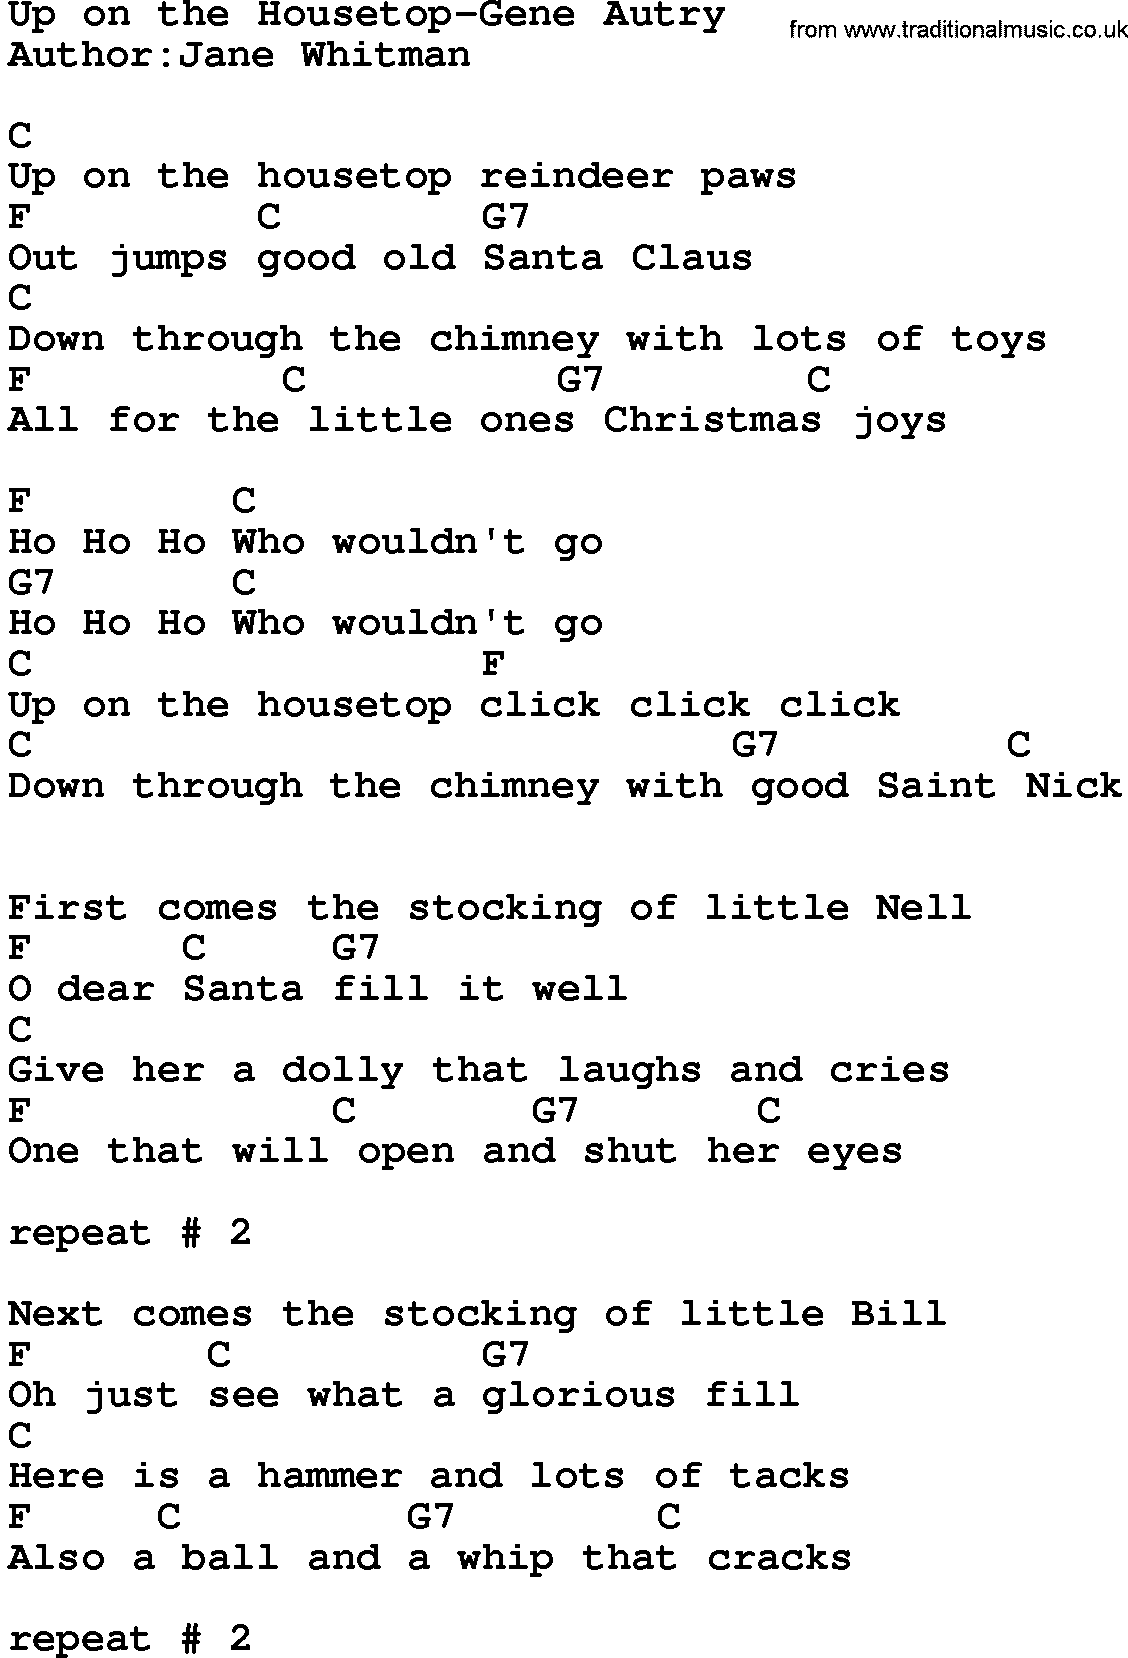 Country music song: Up On The Housetop-Gene Autry lyrics and chords